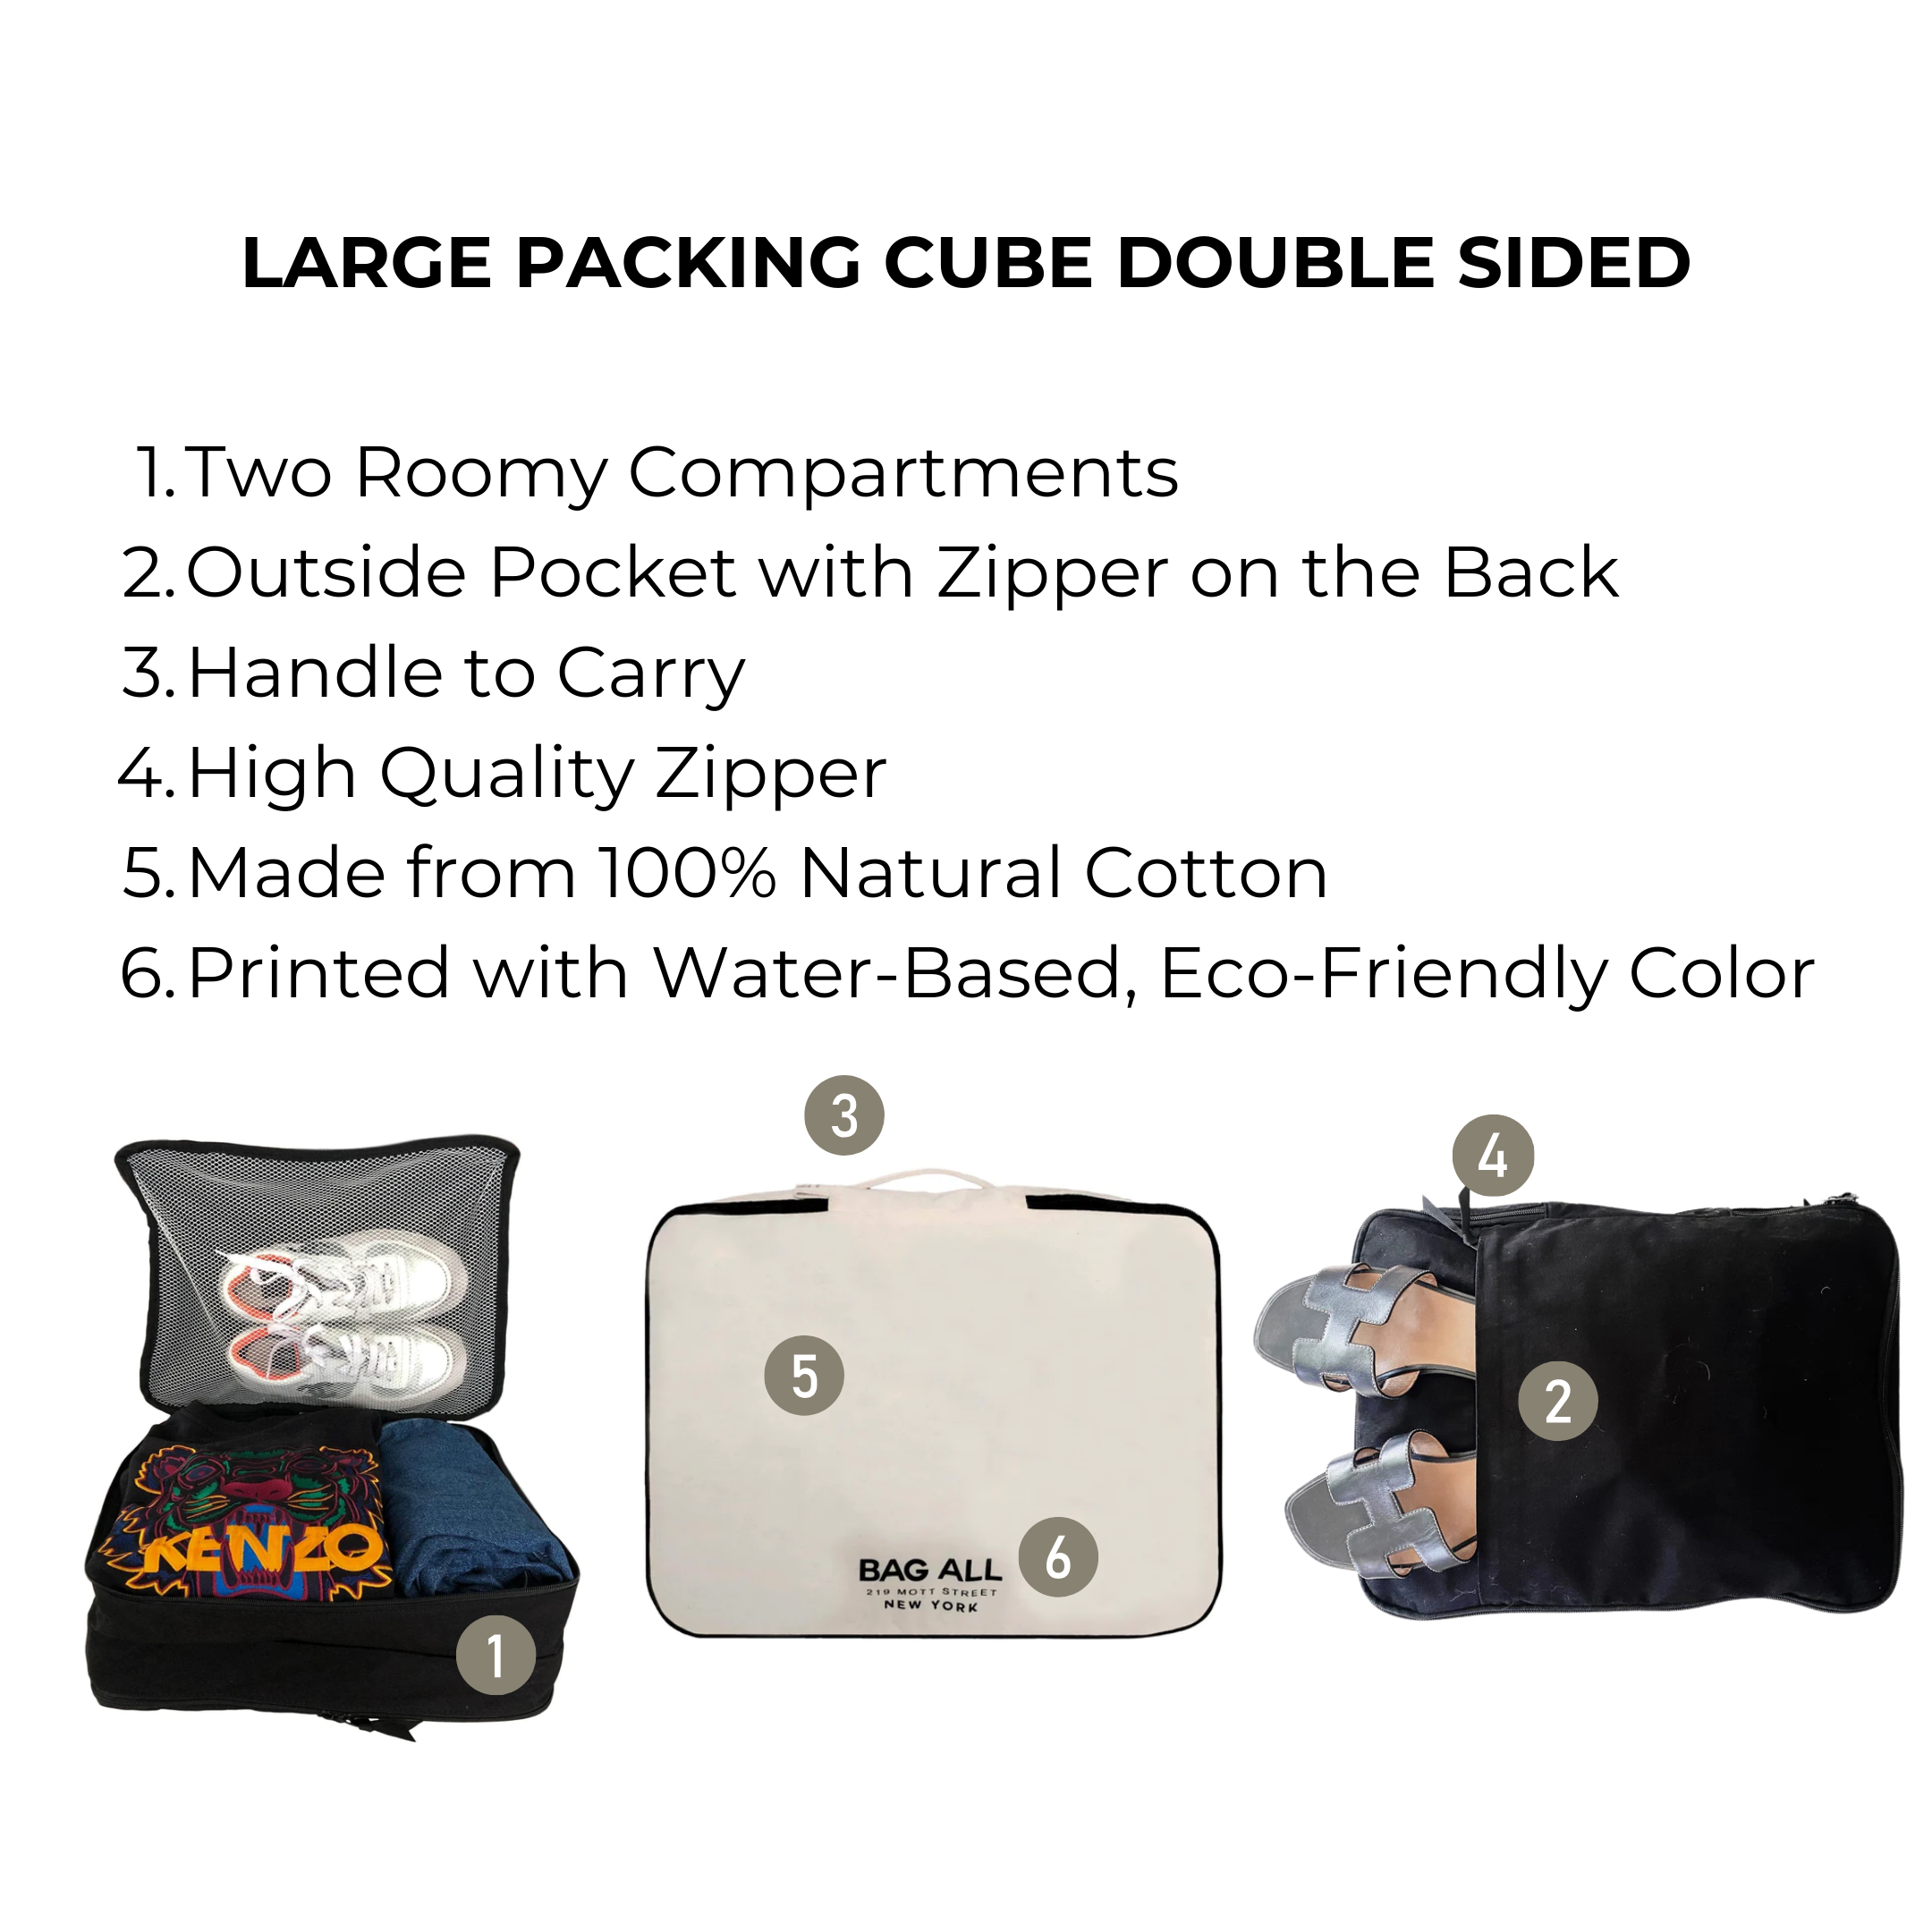 Large Packing Cube, Double Sided, Cream | Bag-all